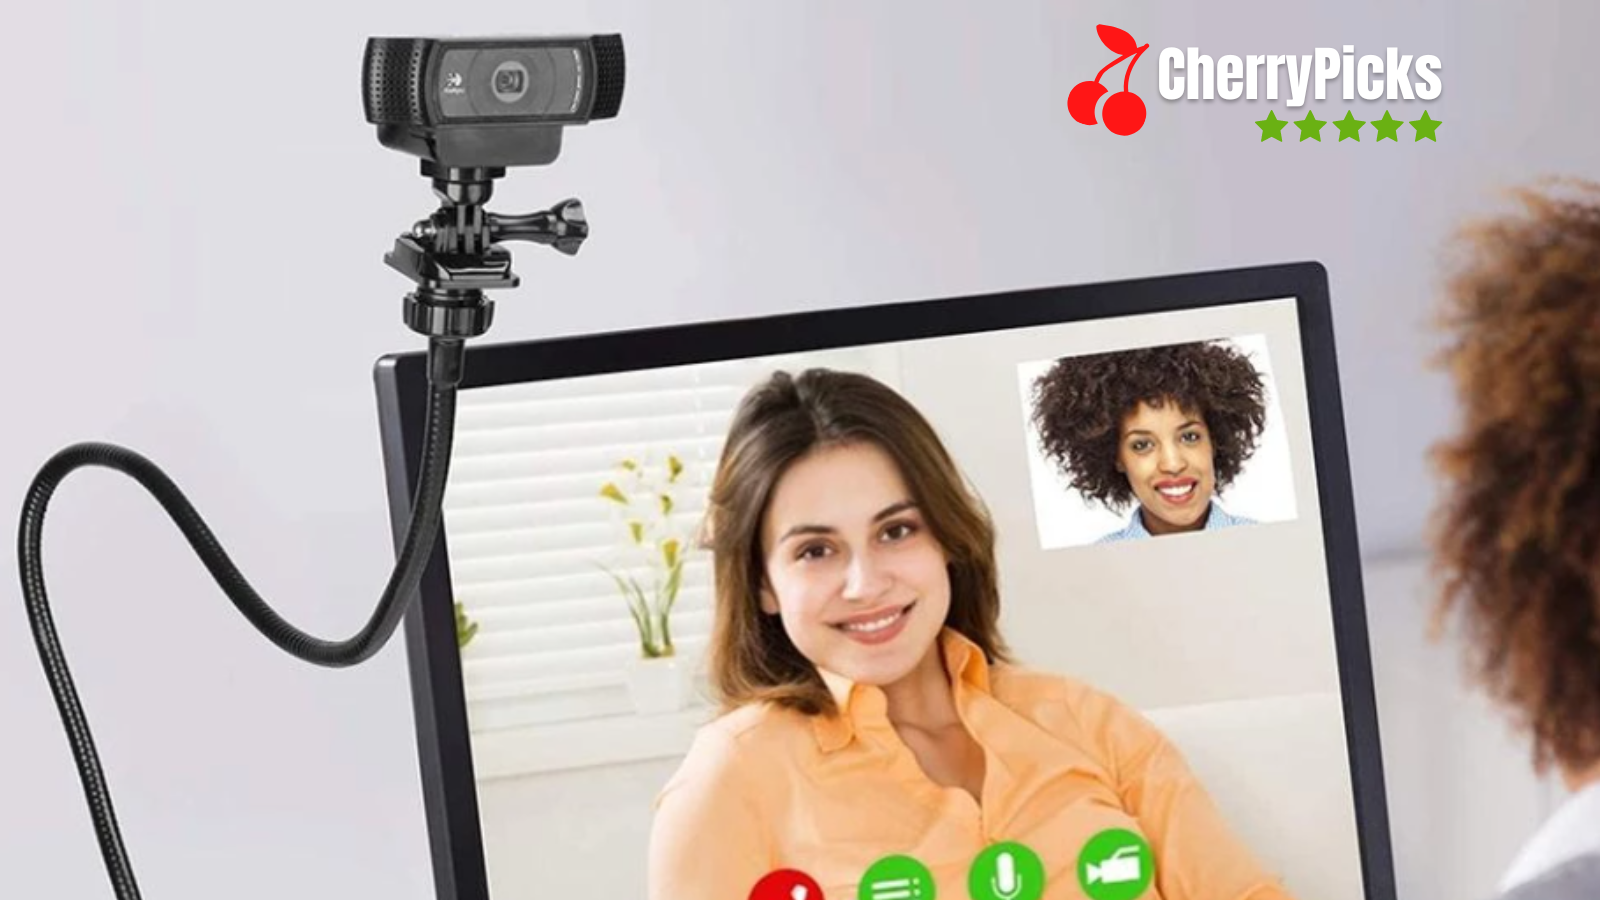 Amada Webcam Tripod Streaming Vlogging Compatible with iPhone Gopro and All Sports Camera Perfect for Selfies Photography Flexible Phone Holder for Video Recording 